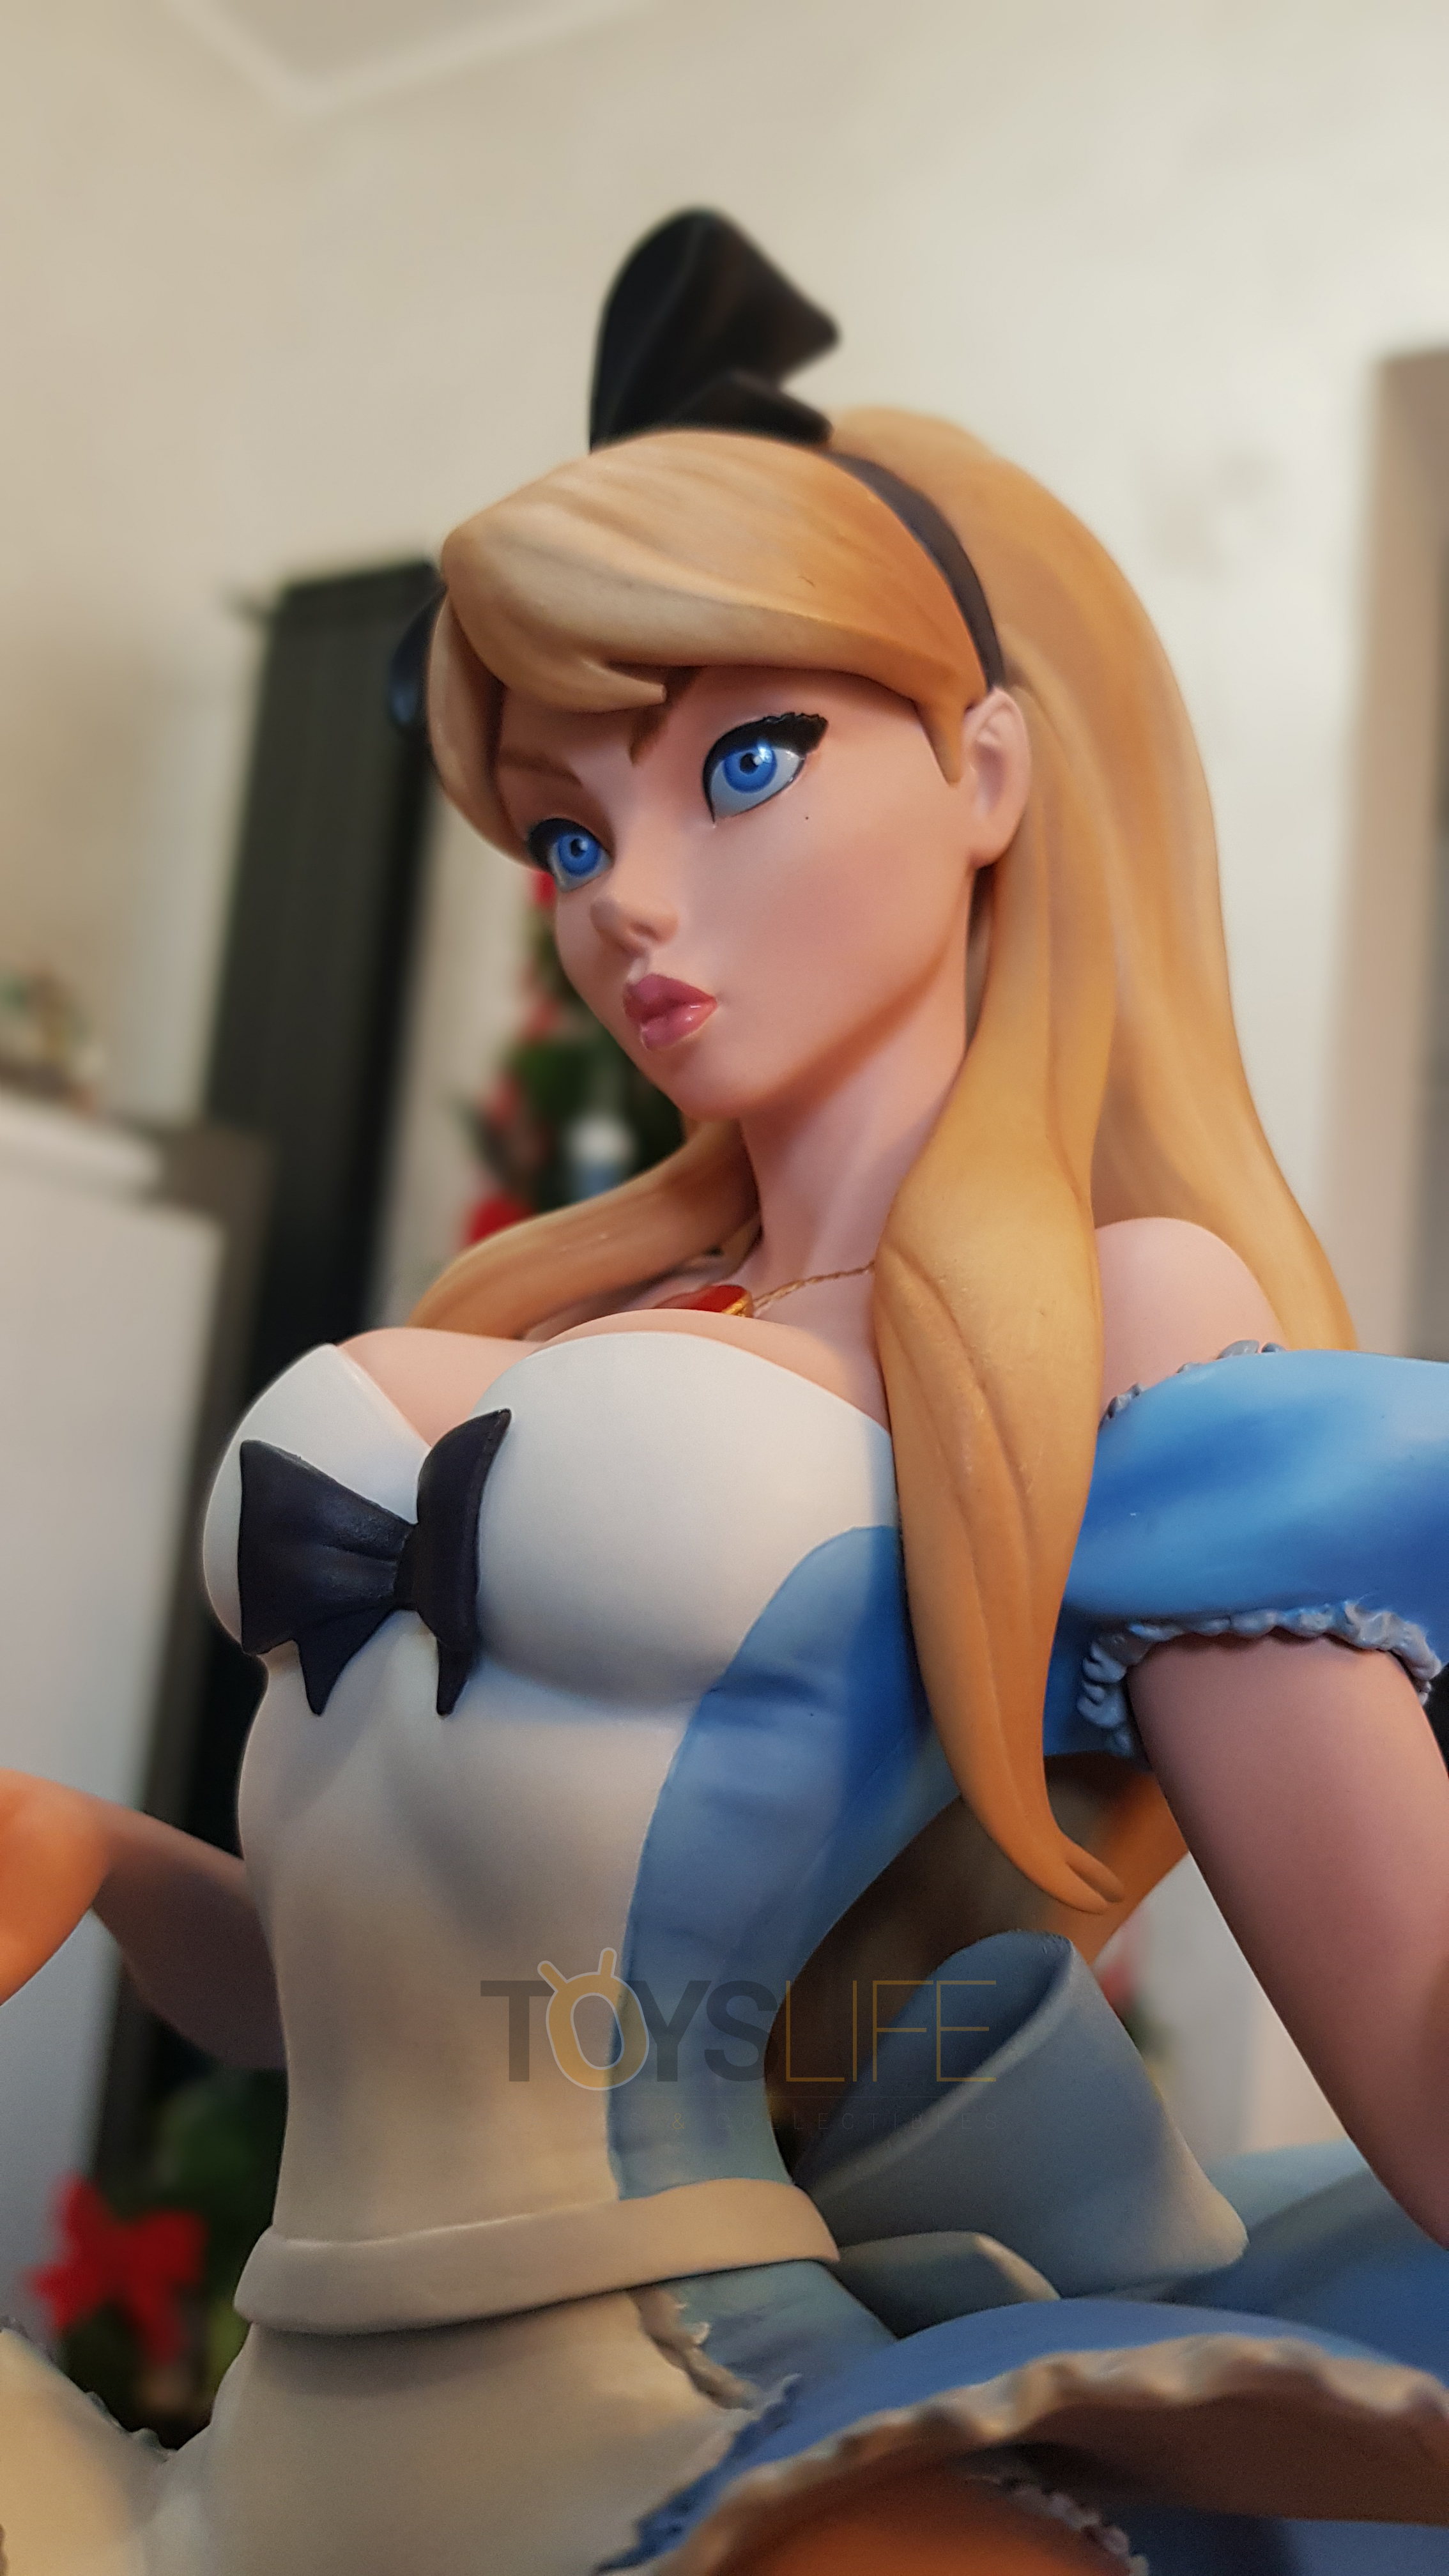 sideshow-fairytale-fantasies-jscampbell-alice-exclusive-statue-toyslife-review-10